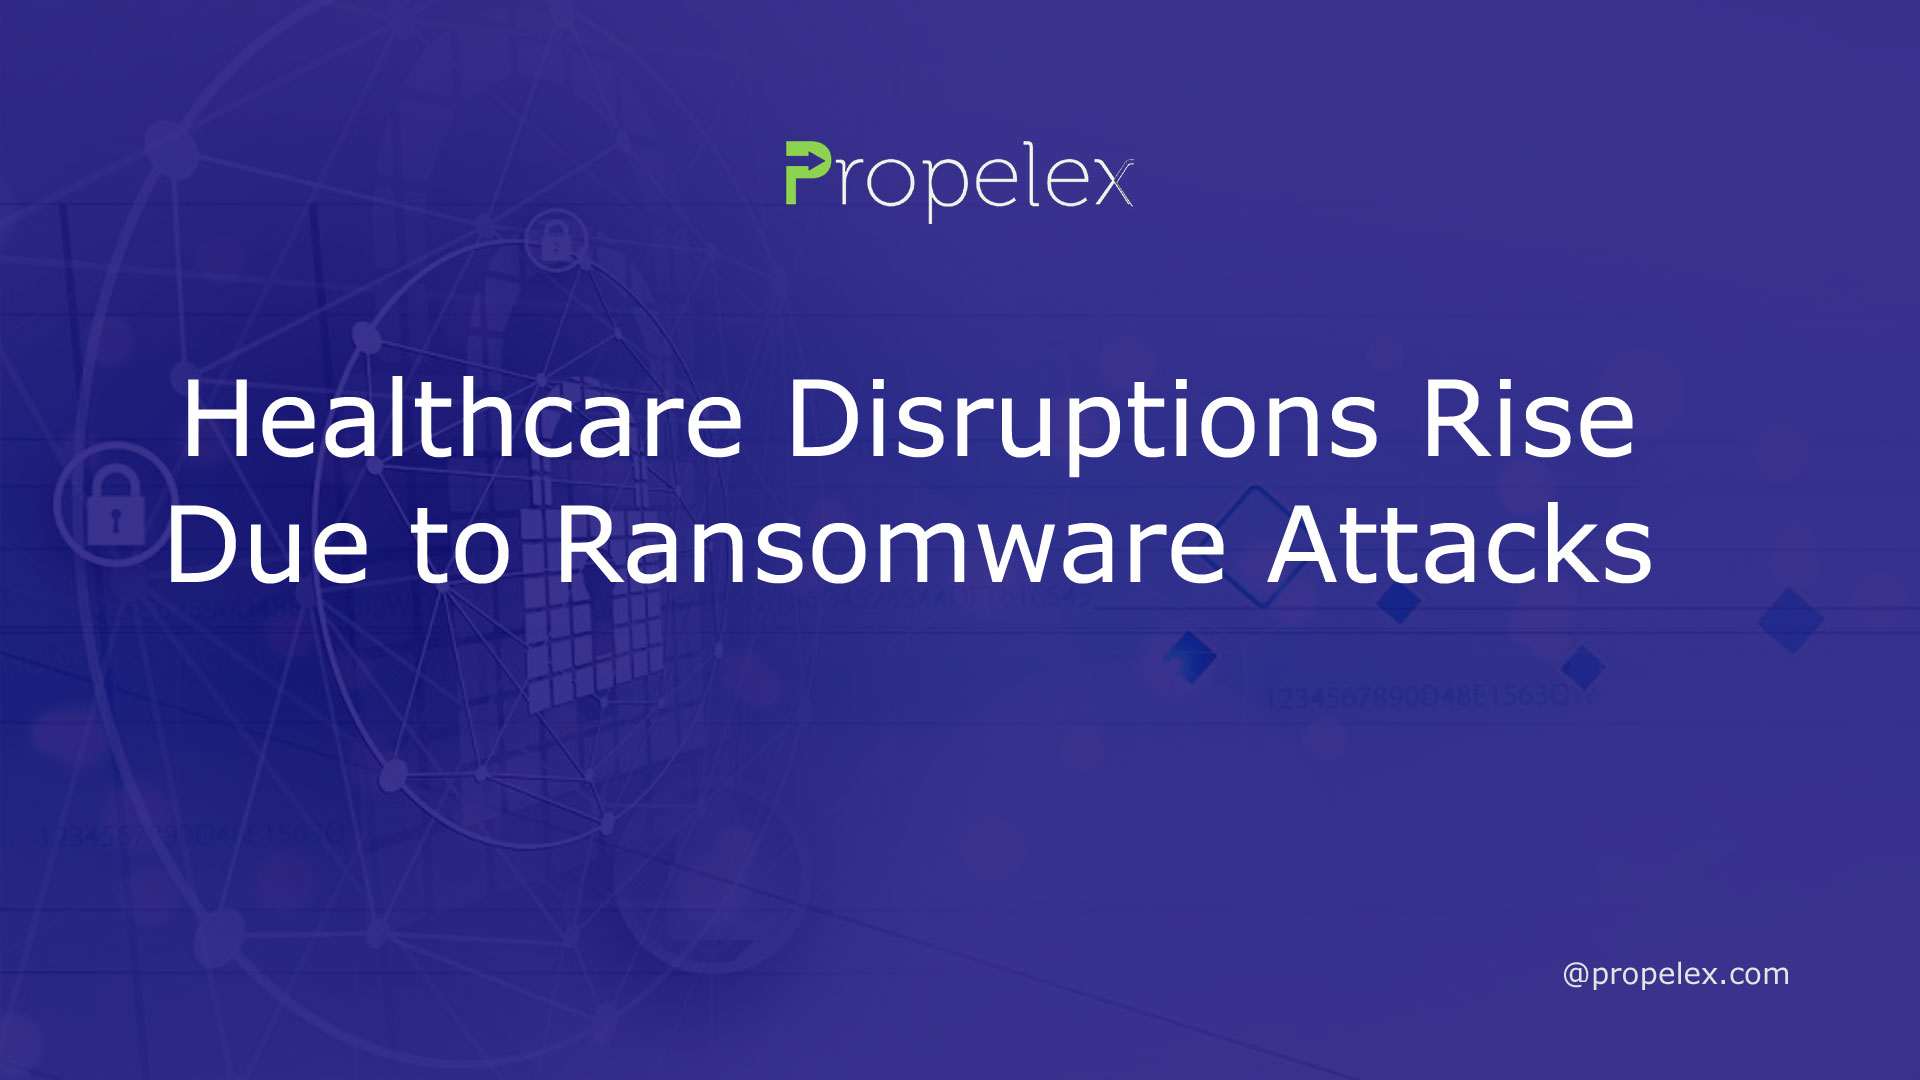 Healthcare Disruptions Rise Due to Ransomware Attacks